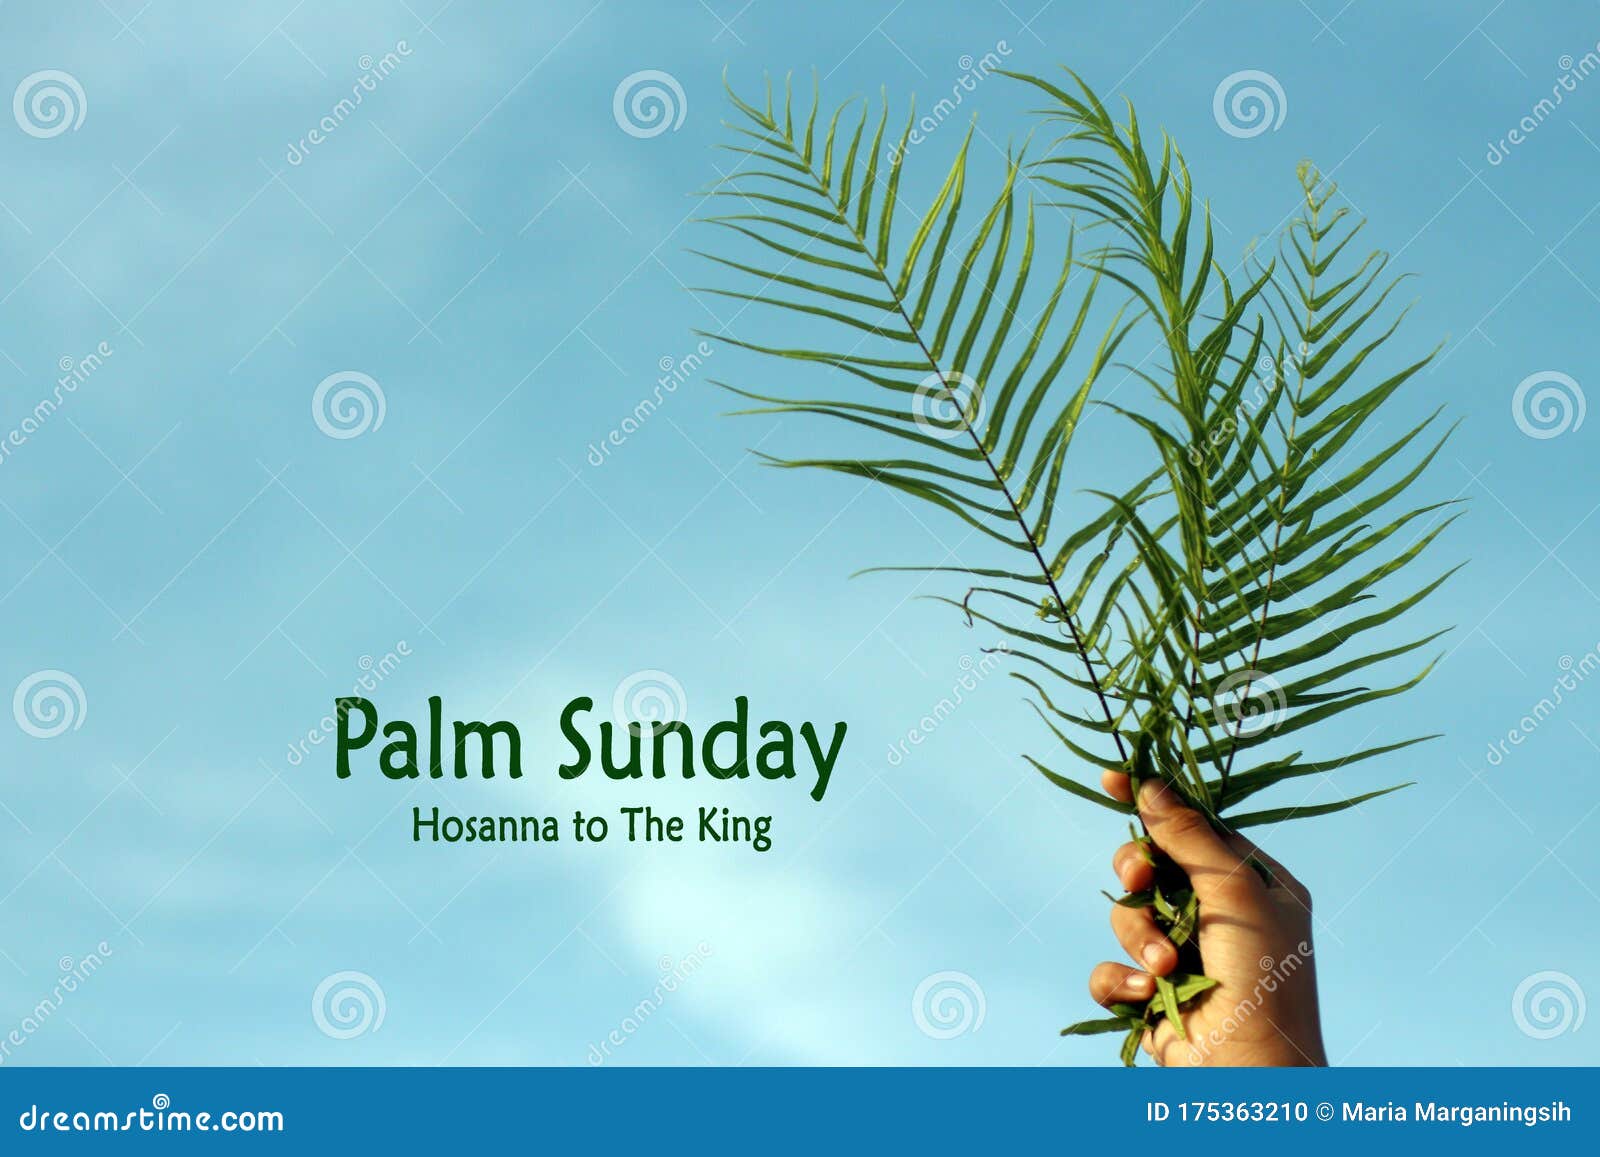 Palm Sunday Quote - Happy Palm Sunday. Fern or Palm Leaf in Hand ...